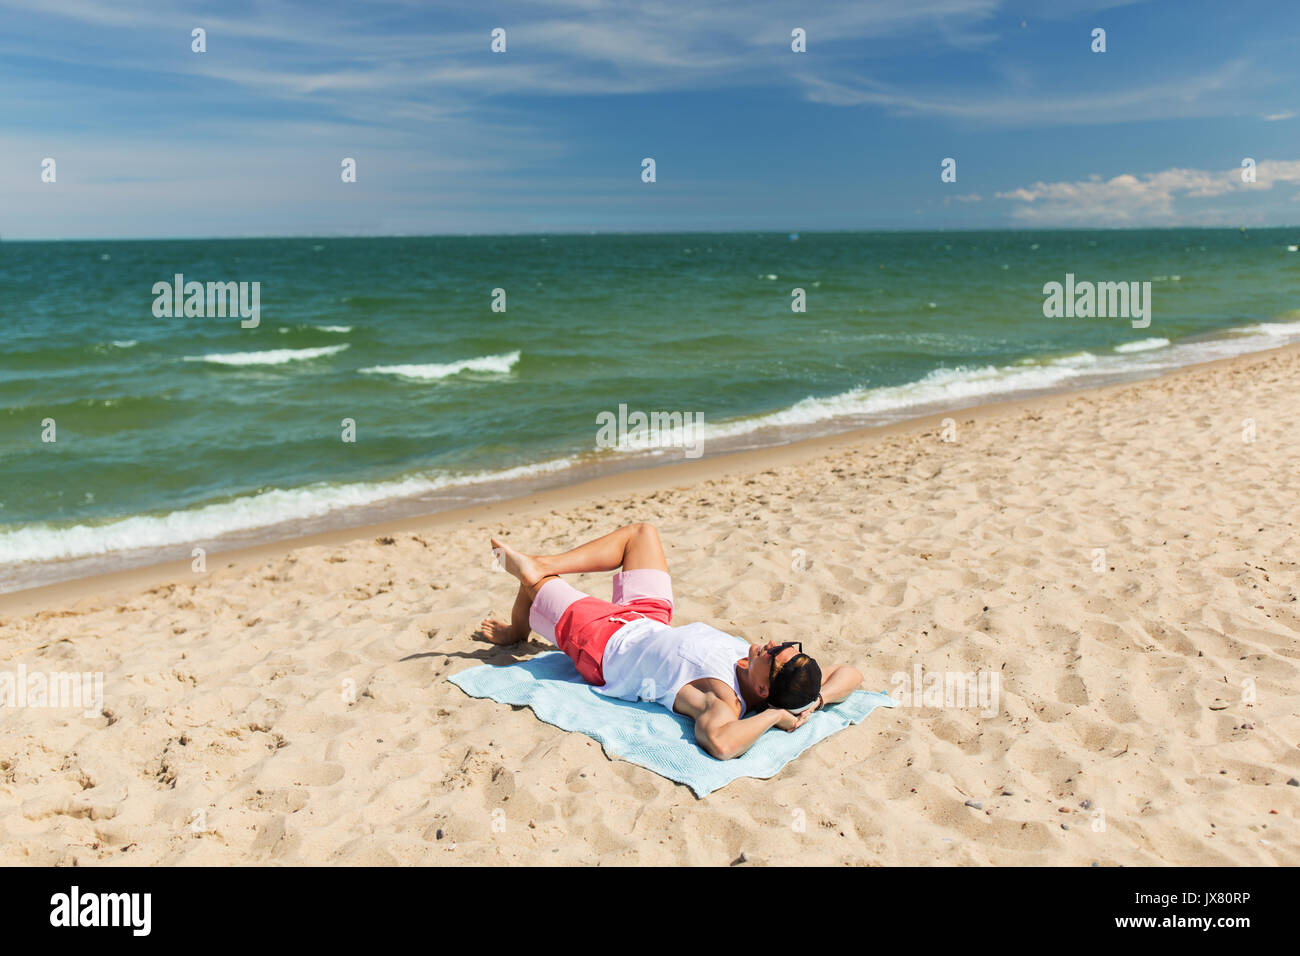 Happy smiling young man sunbathing on beach towel Banque D'Images